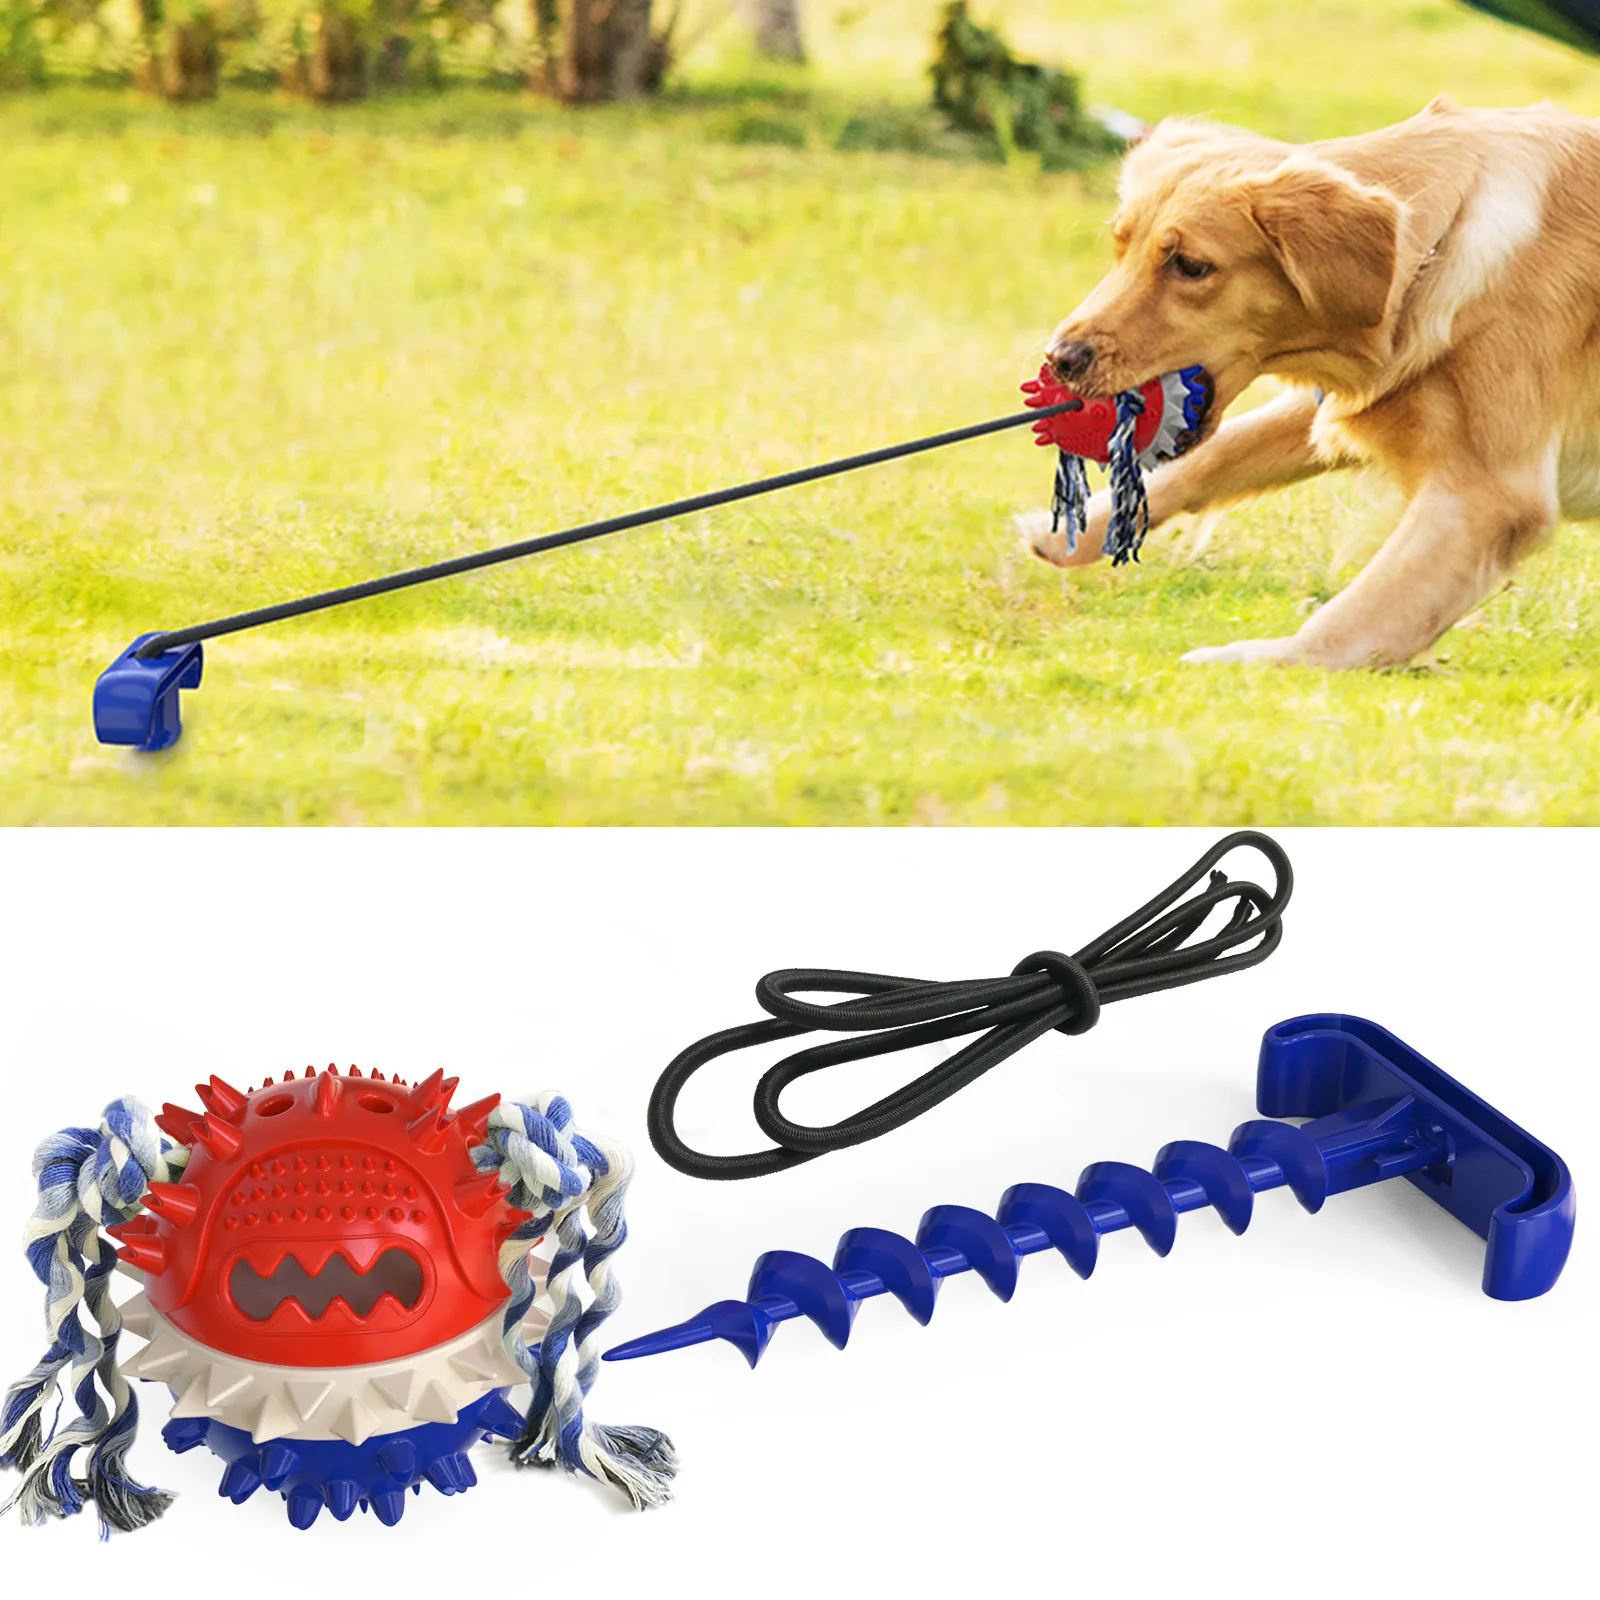 

Outdoor Dog Tug Toy, Chew Toy, Interactive Tug-of -War Game for Aggressive Chewers Dog Training Teething Indestructible Rope